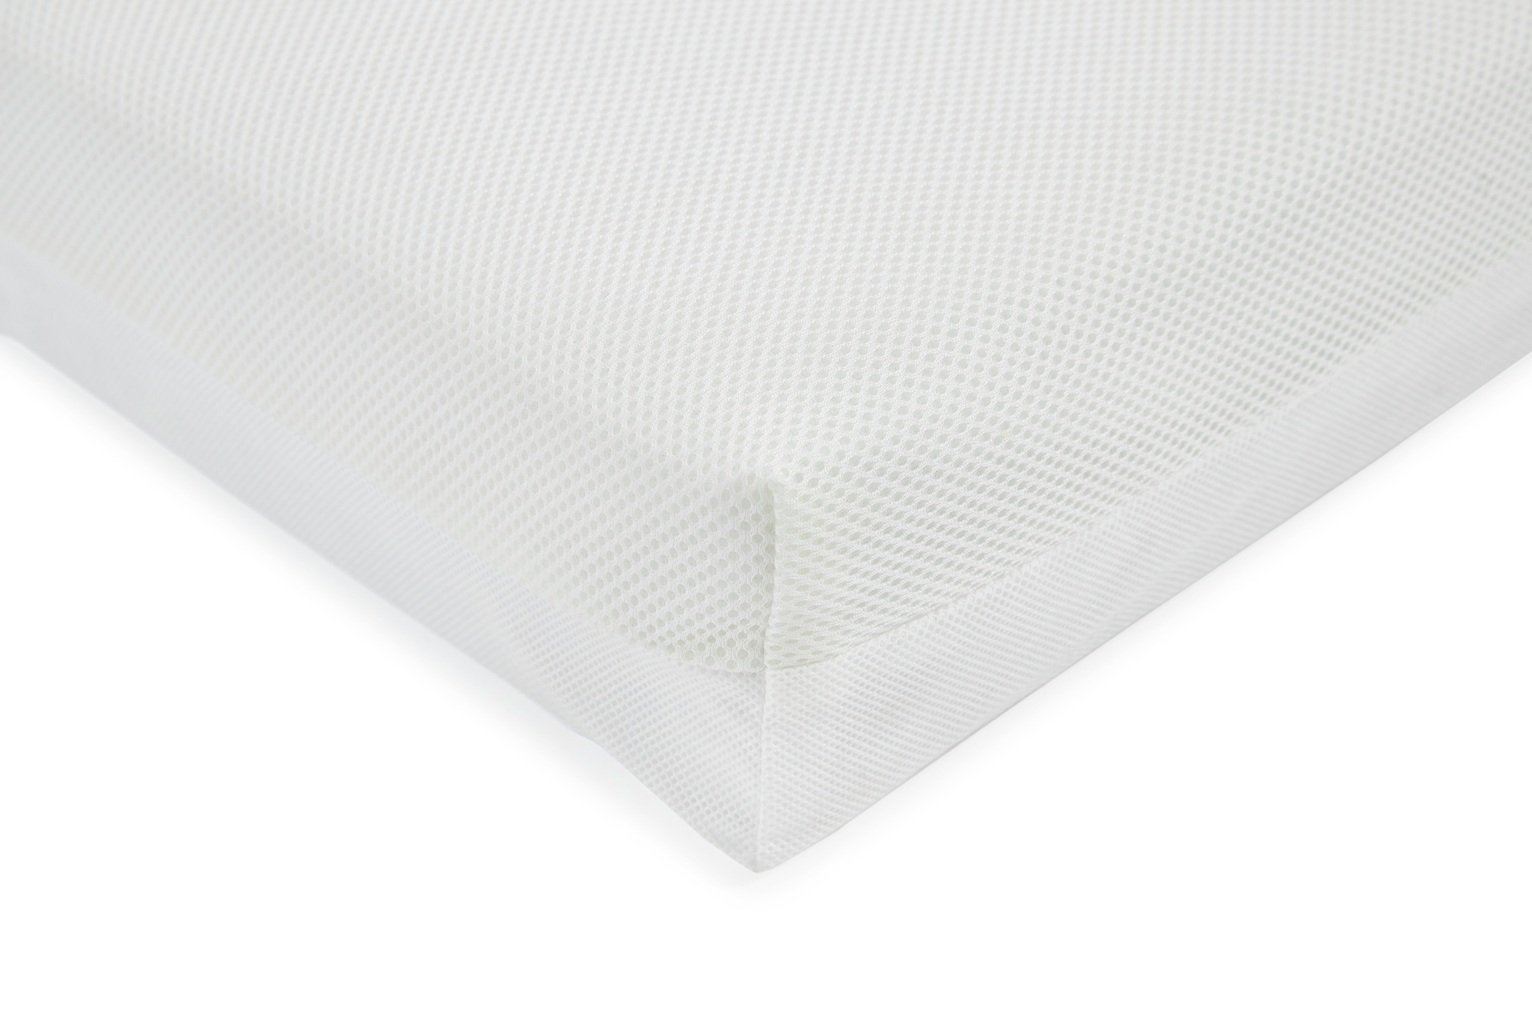 Baby Elegance 140 x 70cm Breathe-Dry Cot Bed Mattress Review